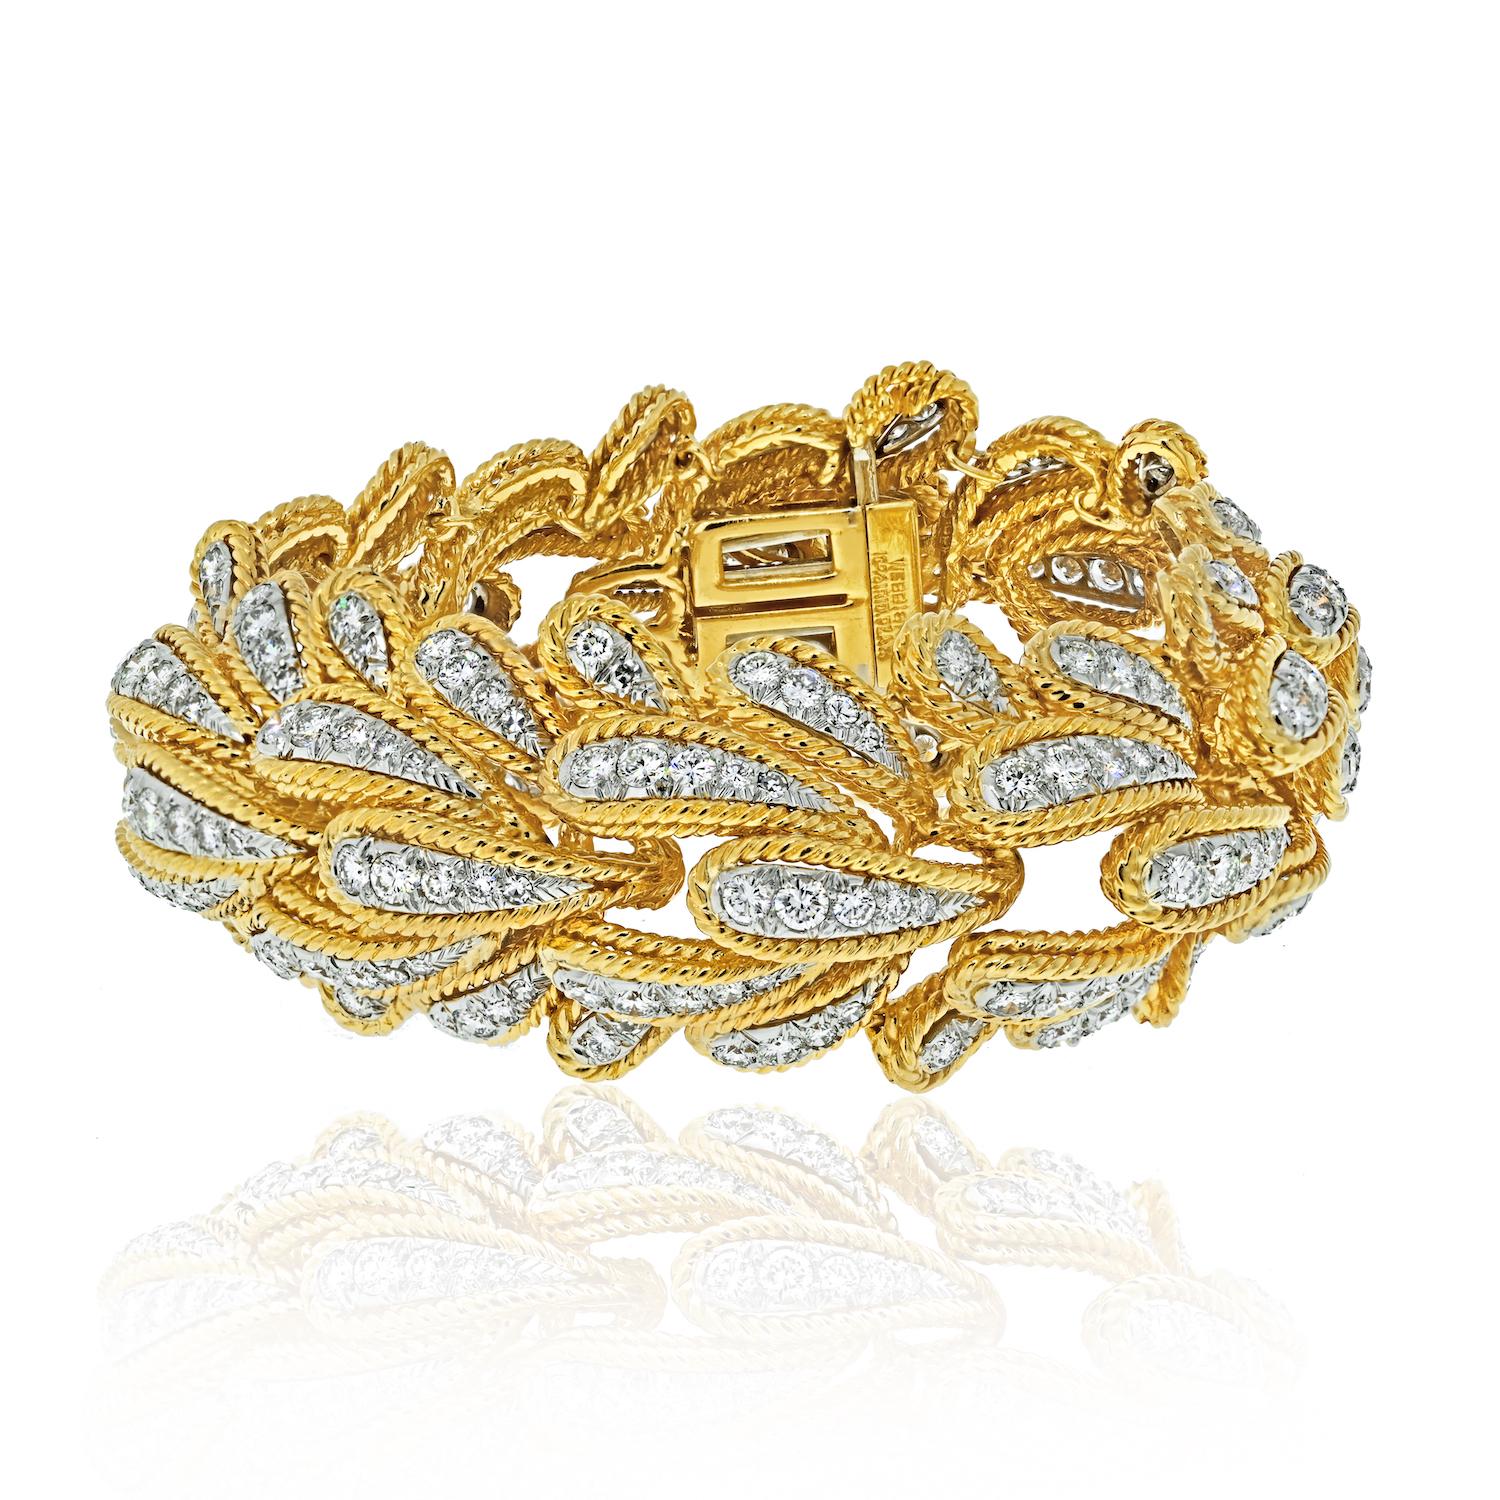 The David Webb Platinum & 18K Yellow Gold 15.00cttw Bombe Diamond Leaf Motif Bracelet is an exquisite piece of jewelry that exudes elegance and luxury. 

Crafted with precision, this bracelet showcases a stunning combination of platinum and 18K